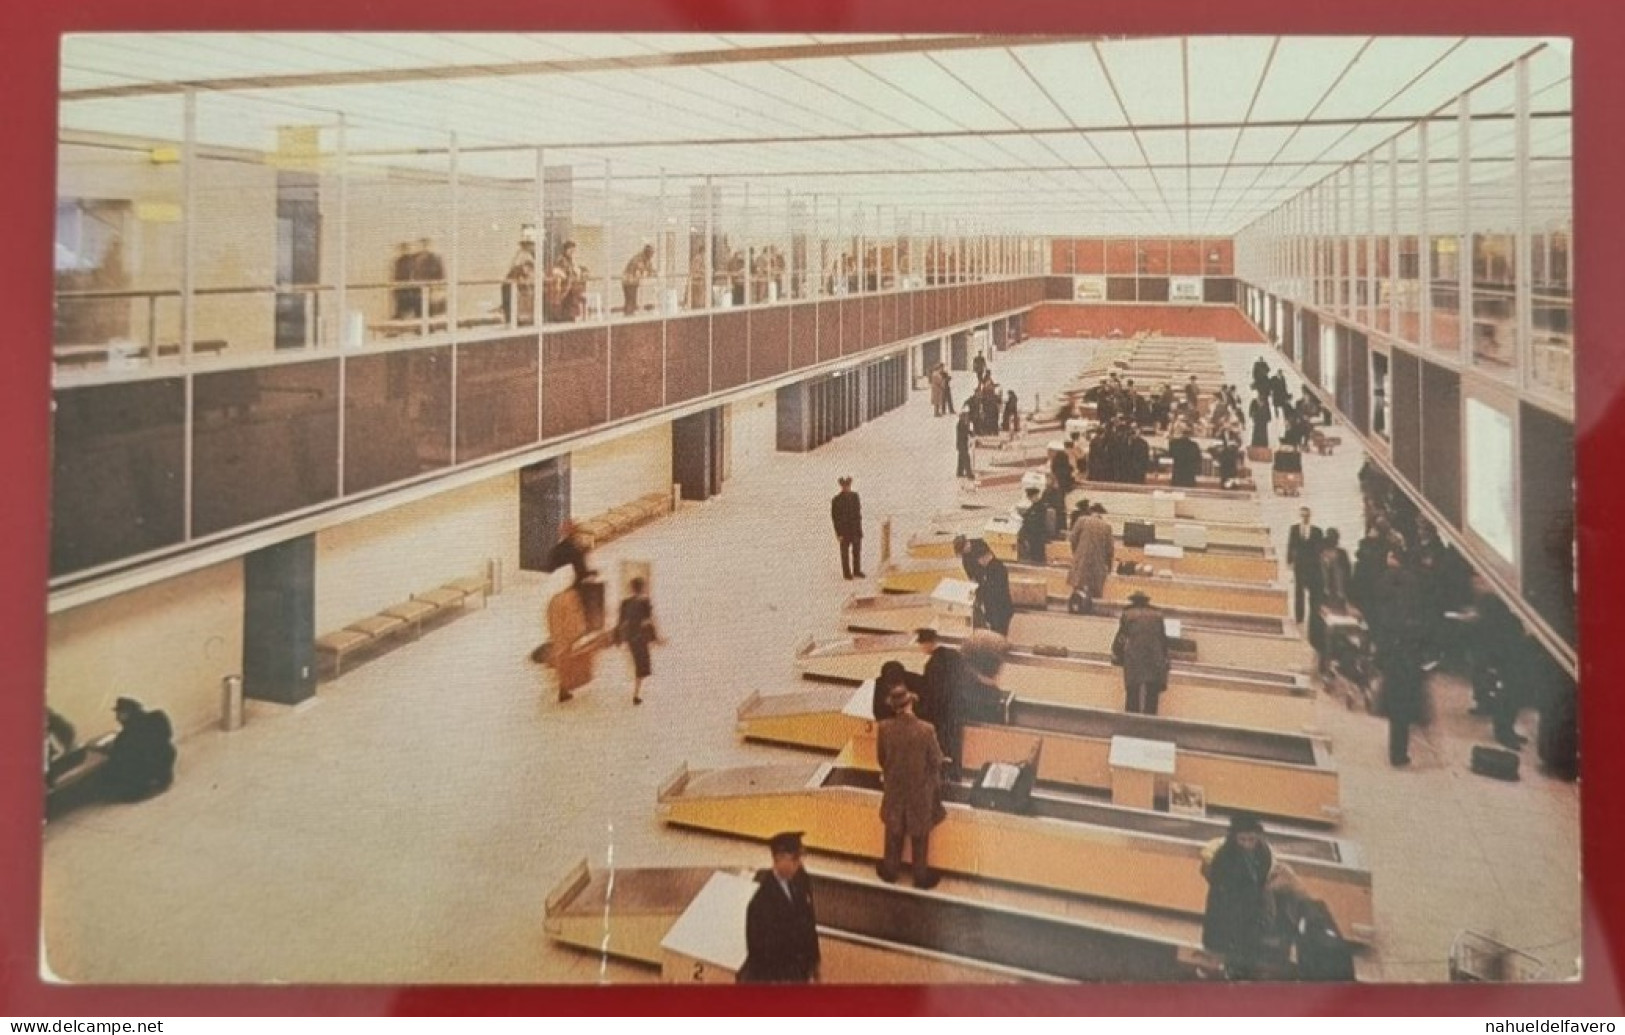 Uncirculated Postcard - USA - NY, NEW YORK CITY - STRAMLINED CUSTOMS FACILITIES, NEW YORK INTERNATIONAL AIRPORT - Luchthavens